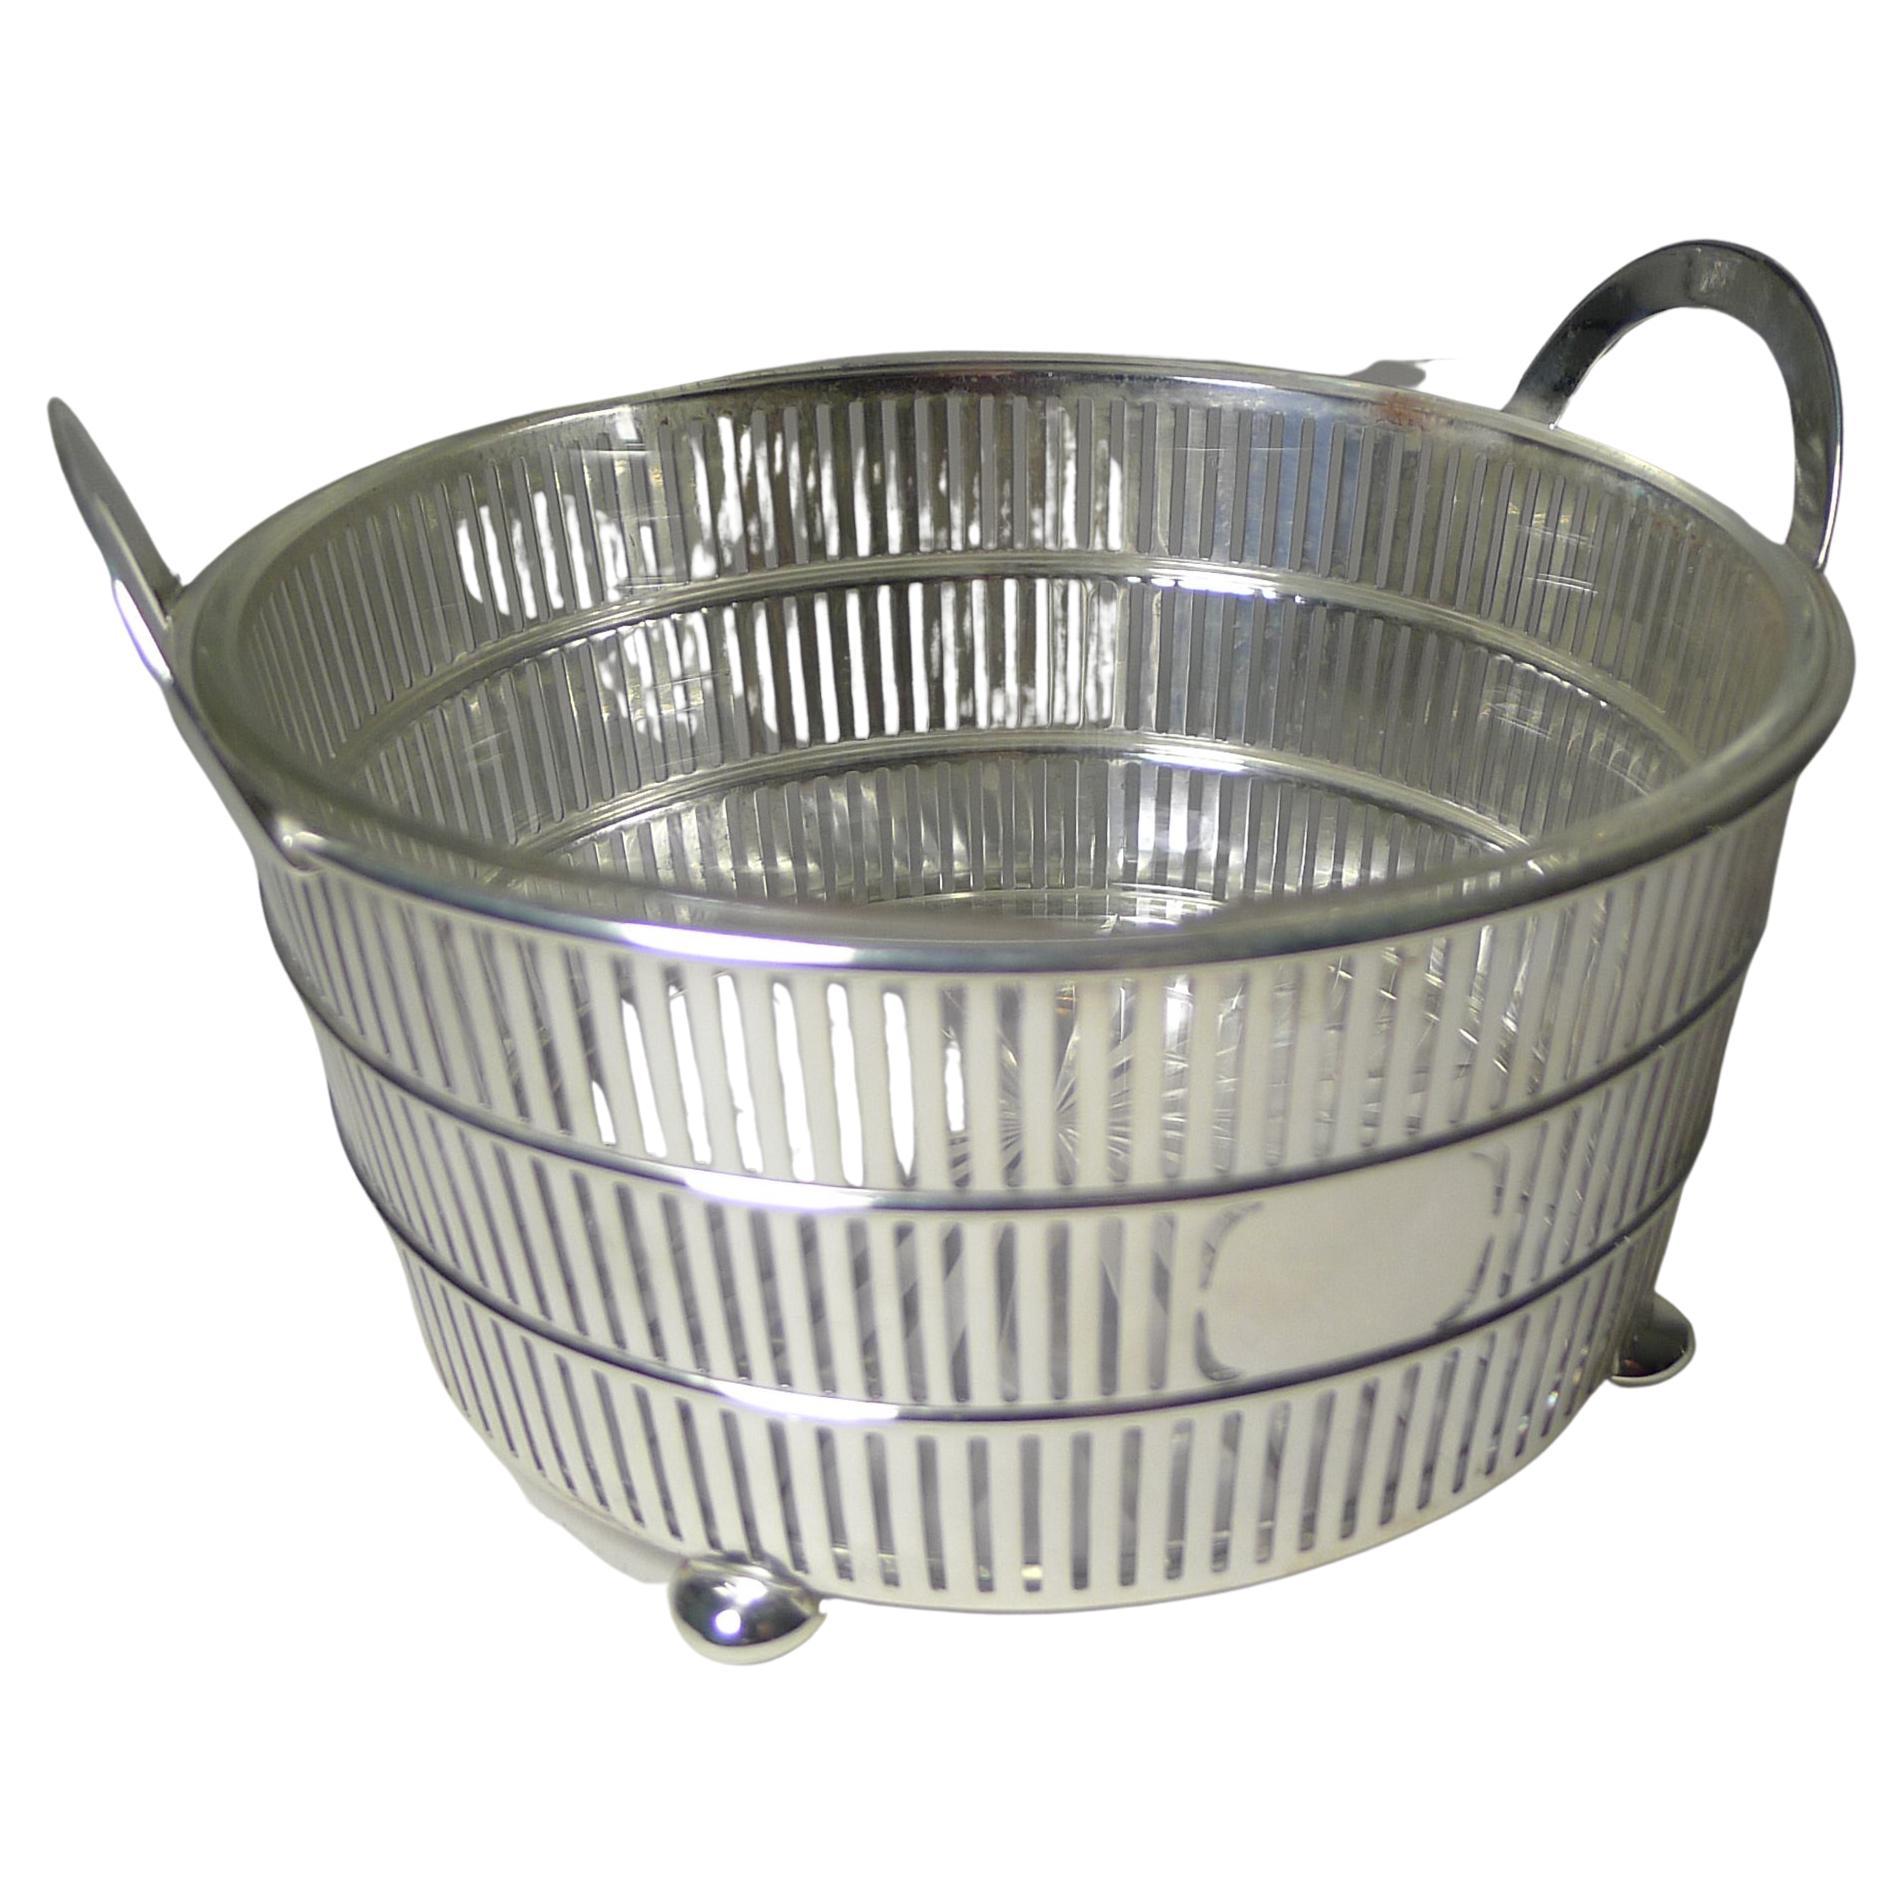 A handsome glass lined bowl with a great look to suit any interior from traditional to modern. The basket is made from American sterling silver with clean lines, reticulated or pierced with a vacant cartouche to the front.

The underside retains